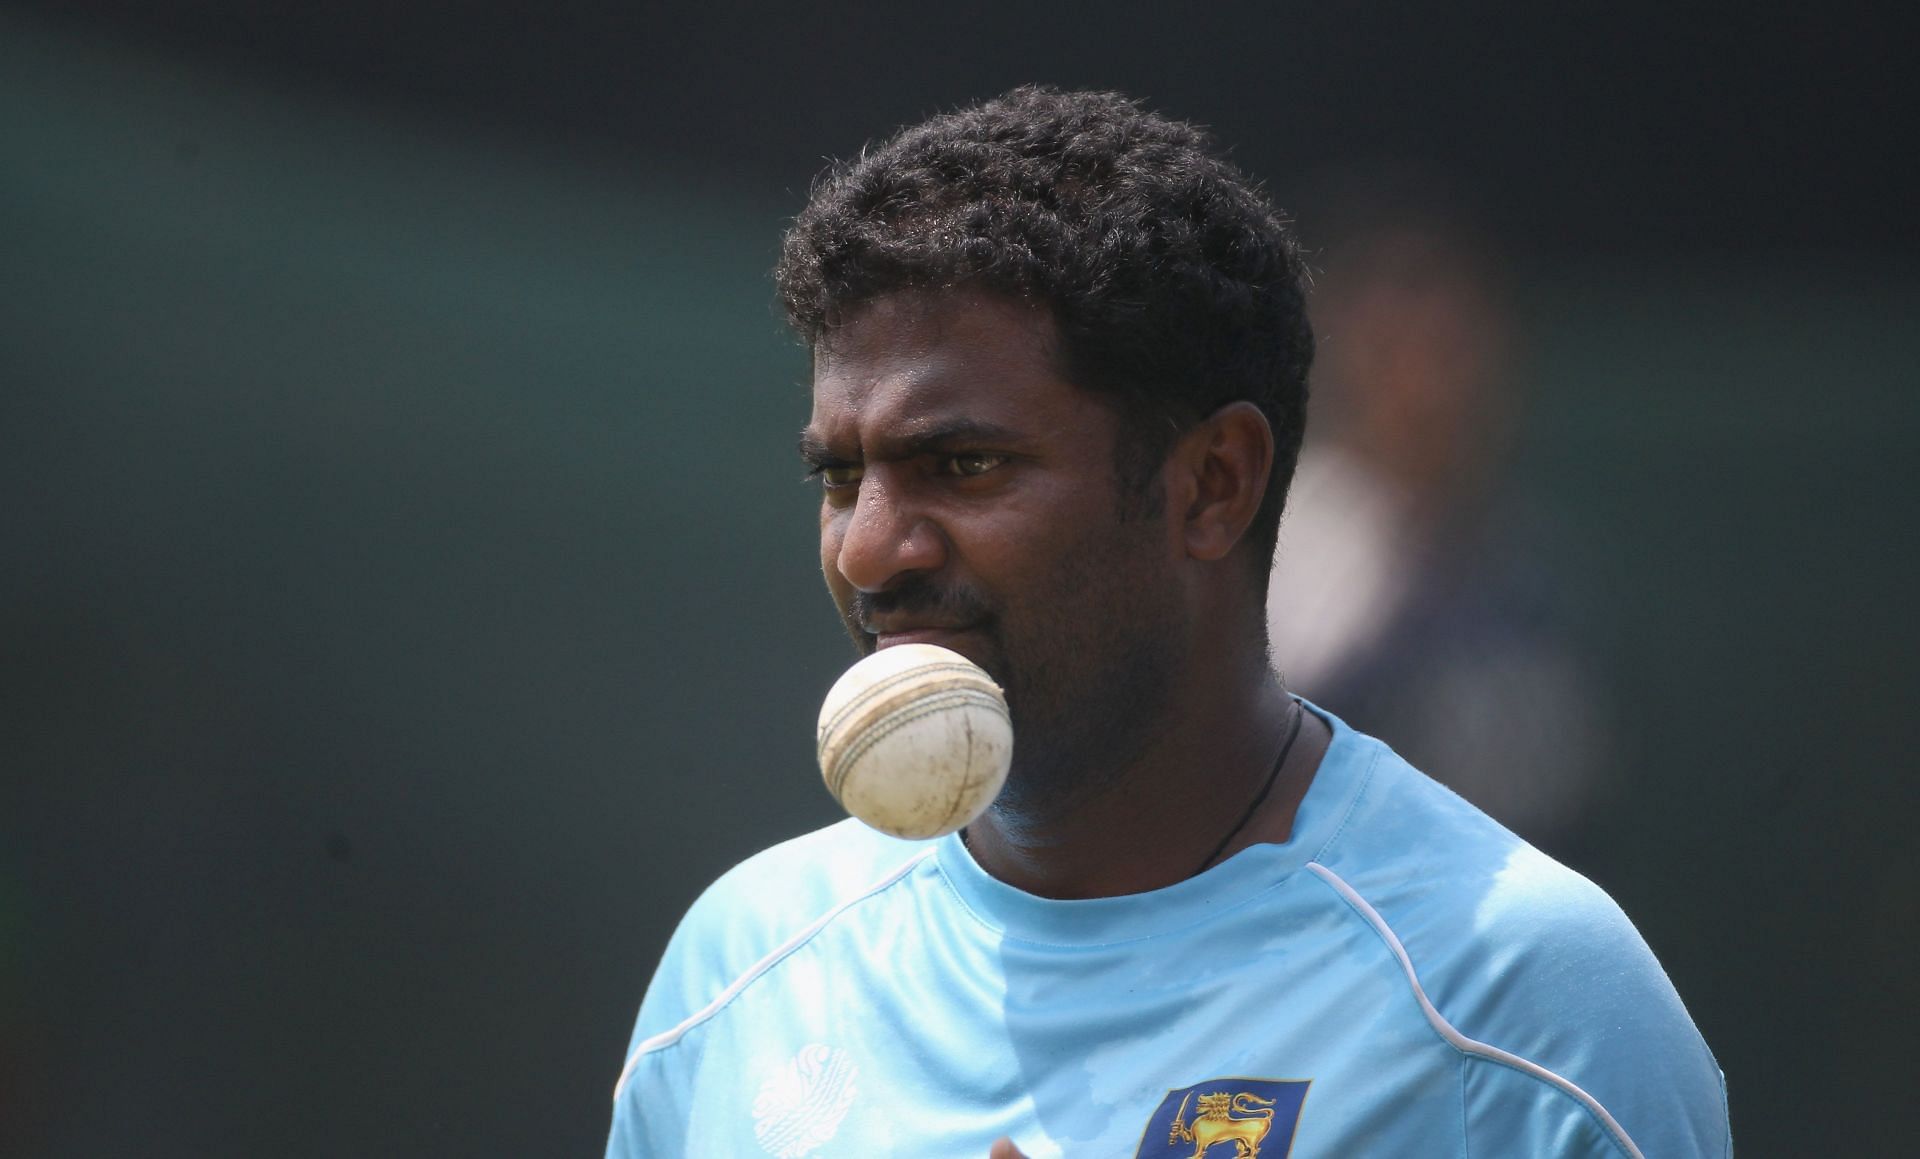 Sri Lanka playing 11 from Muttiah Muralitharan's last Test - where are they now?